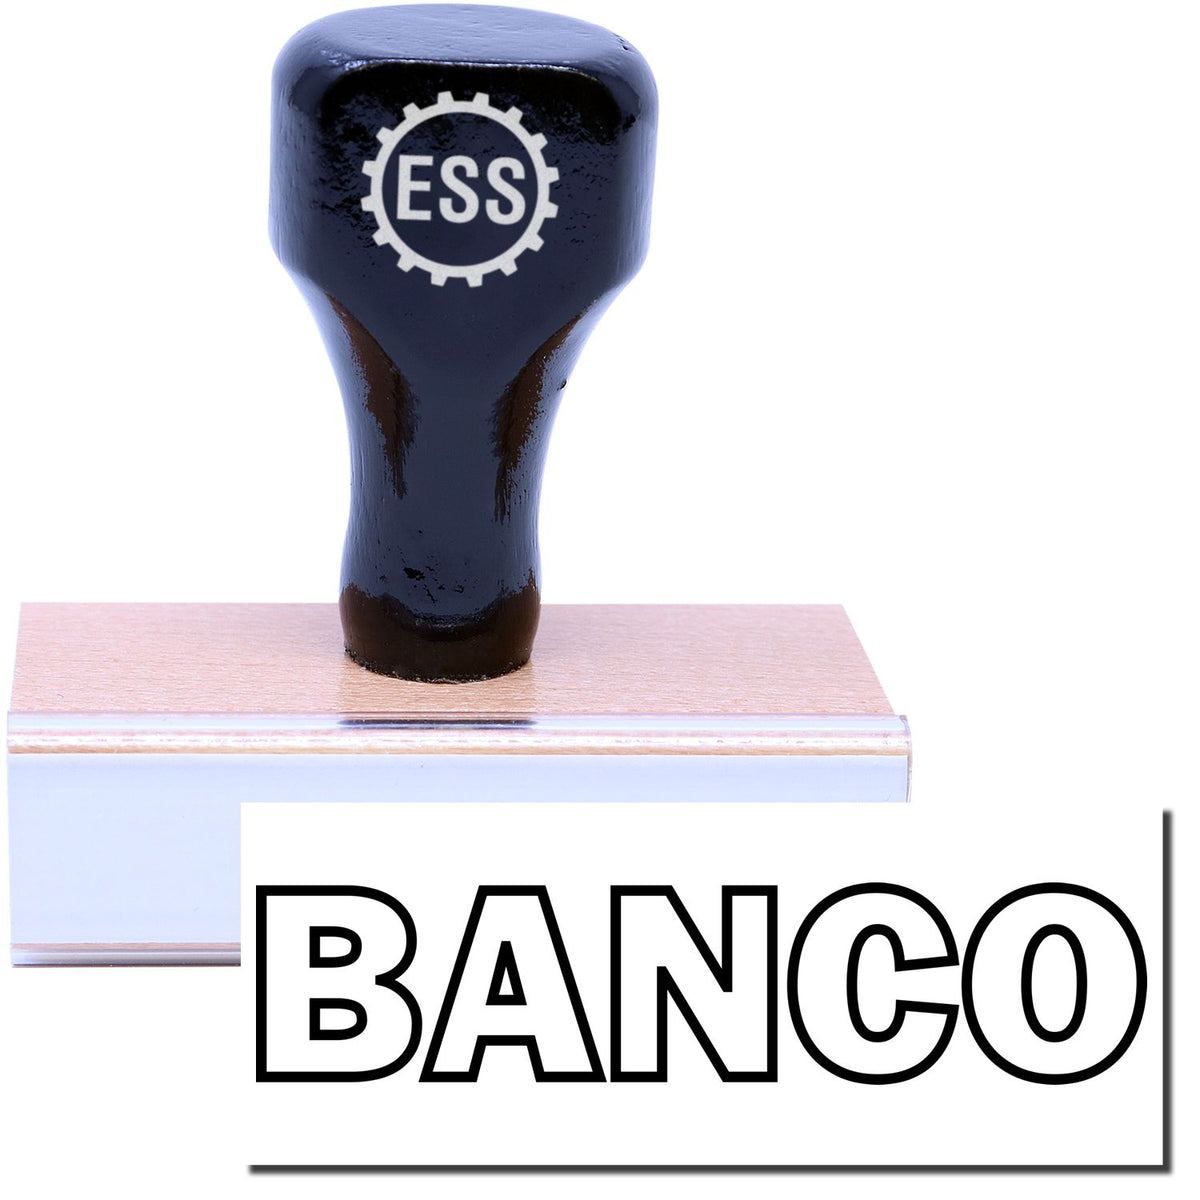 A stock office rubber stamp with a stamped image showing how the text &quot;BANCO&quot; in an outline font is displayed after stamping.